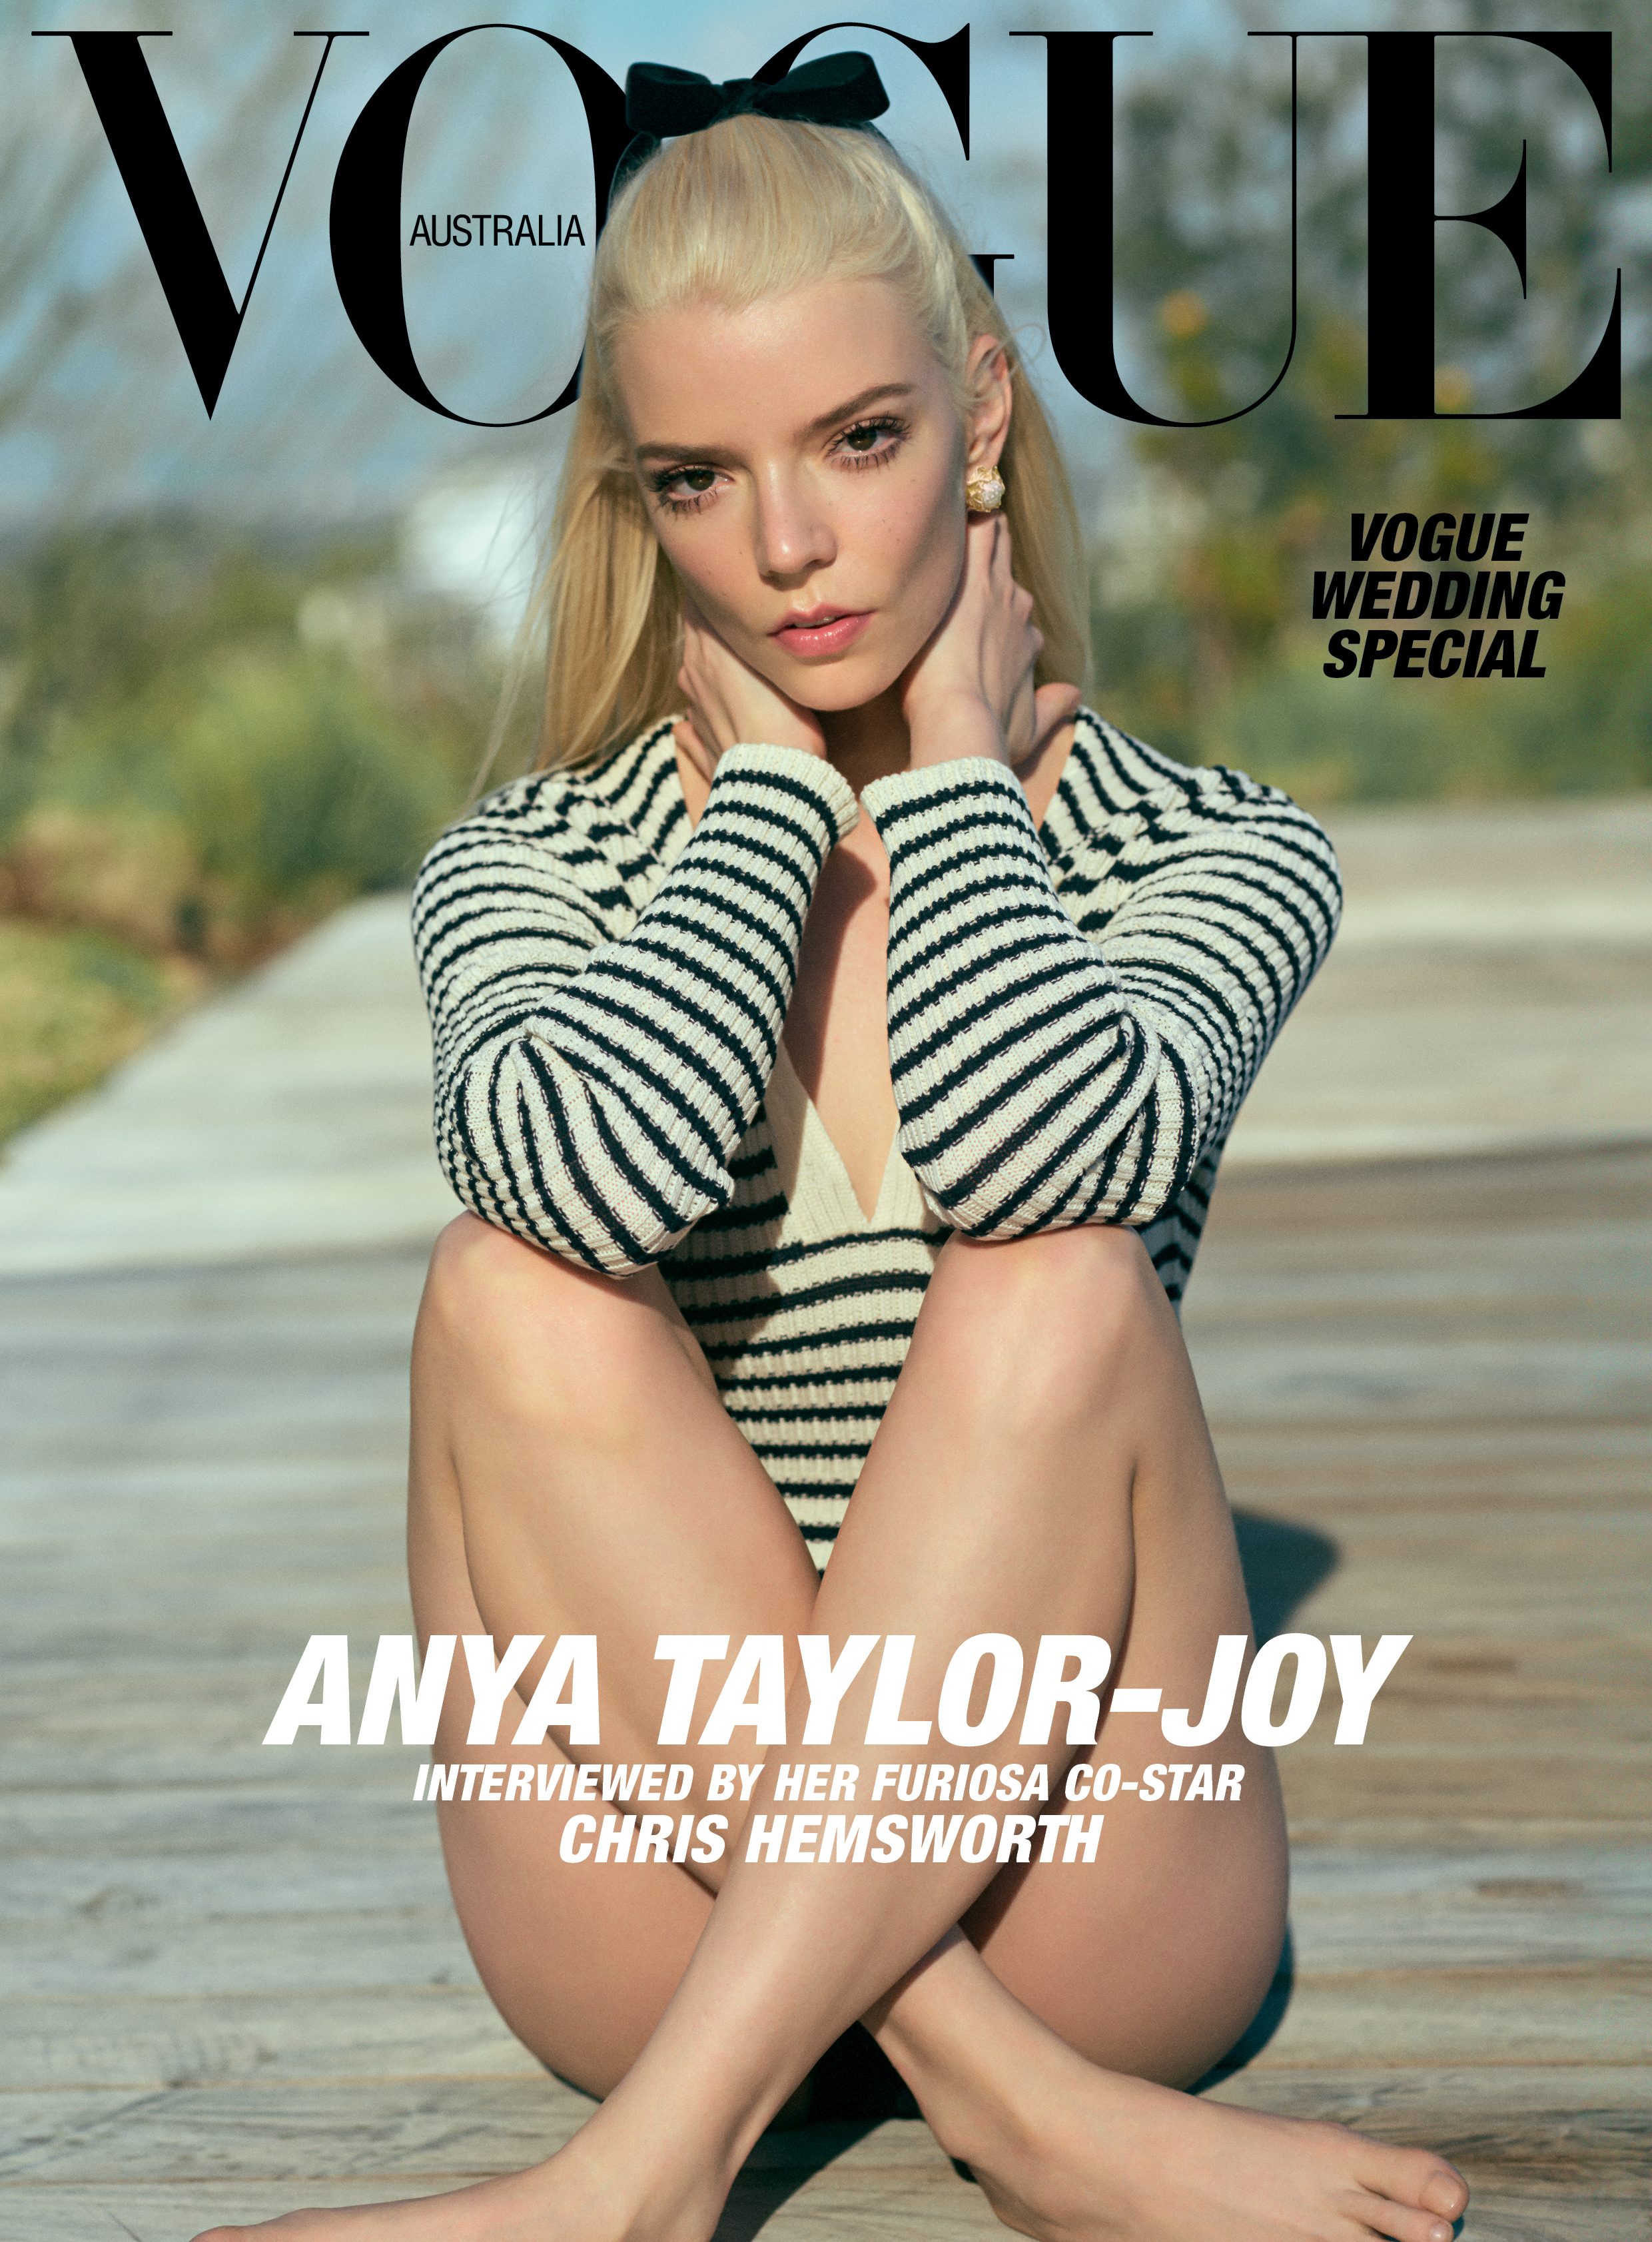 Anya gushed to Vogue Australia about Malcolm McRae